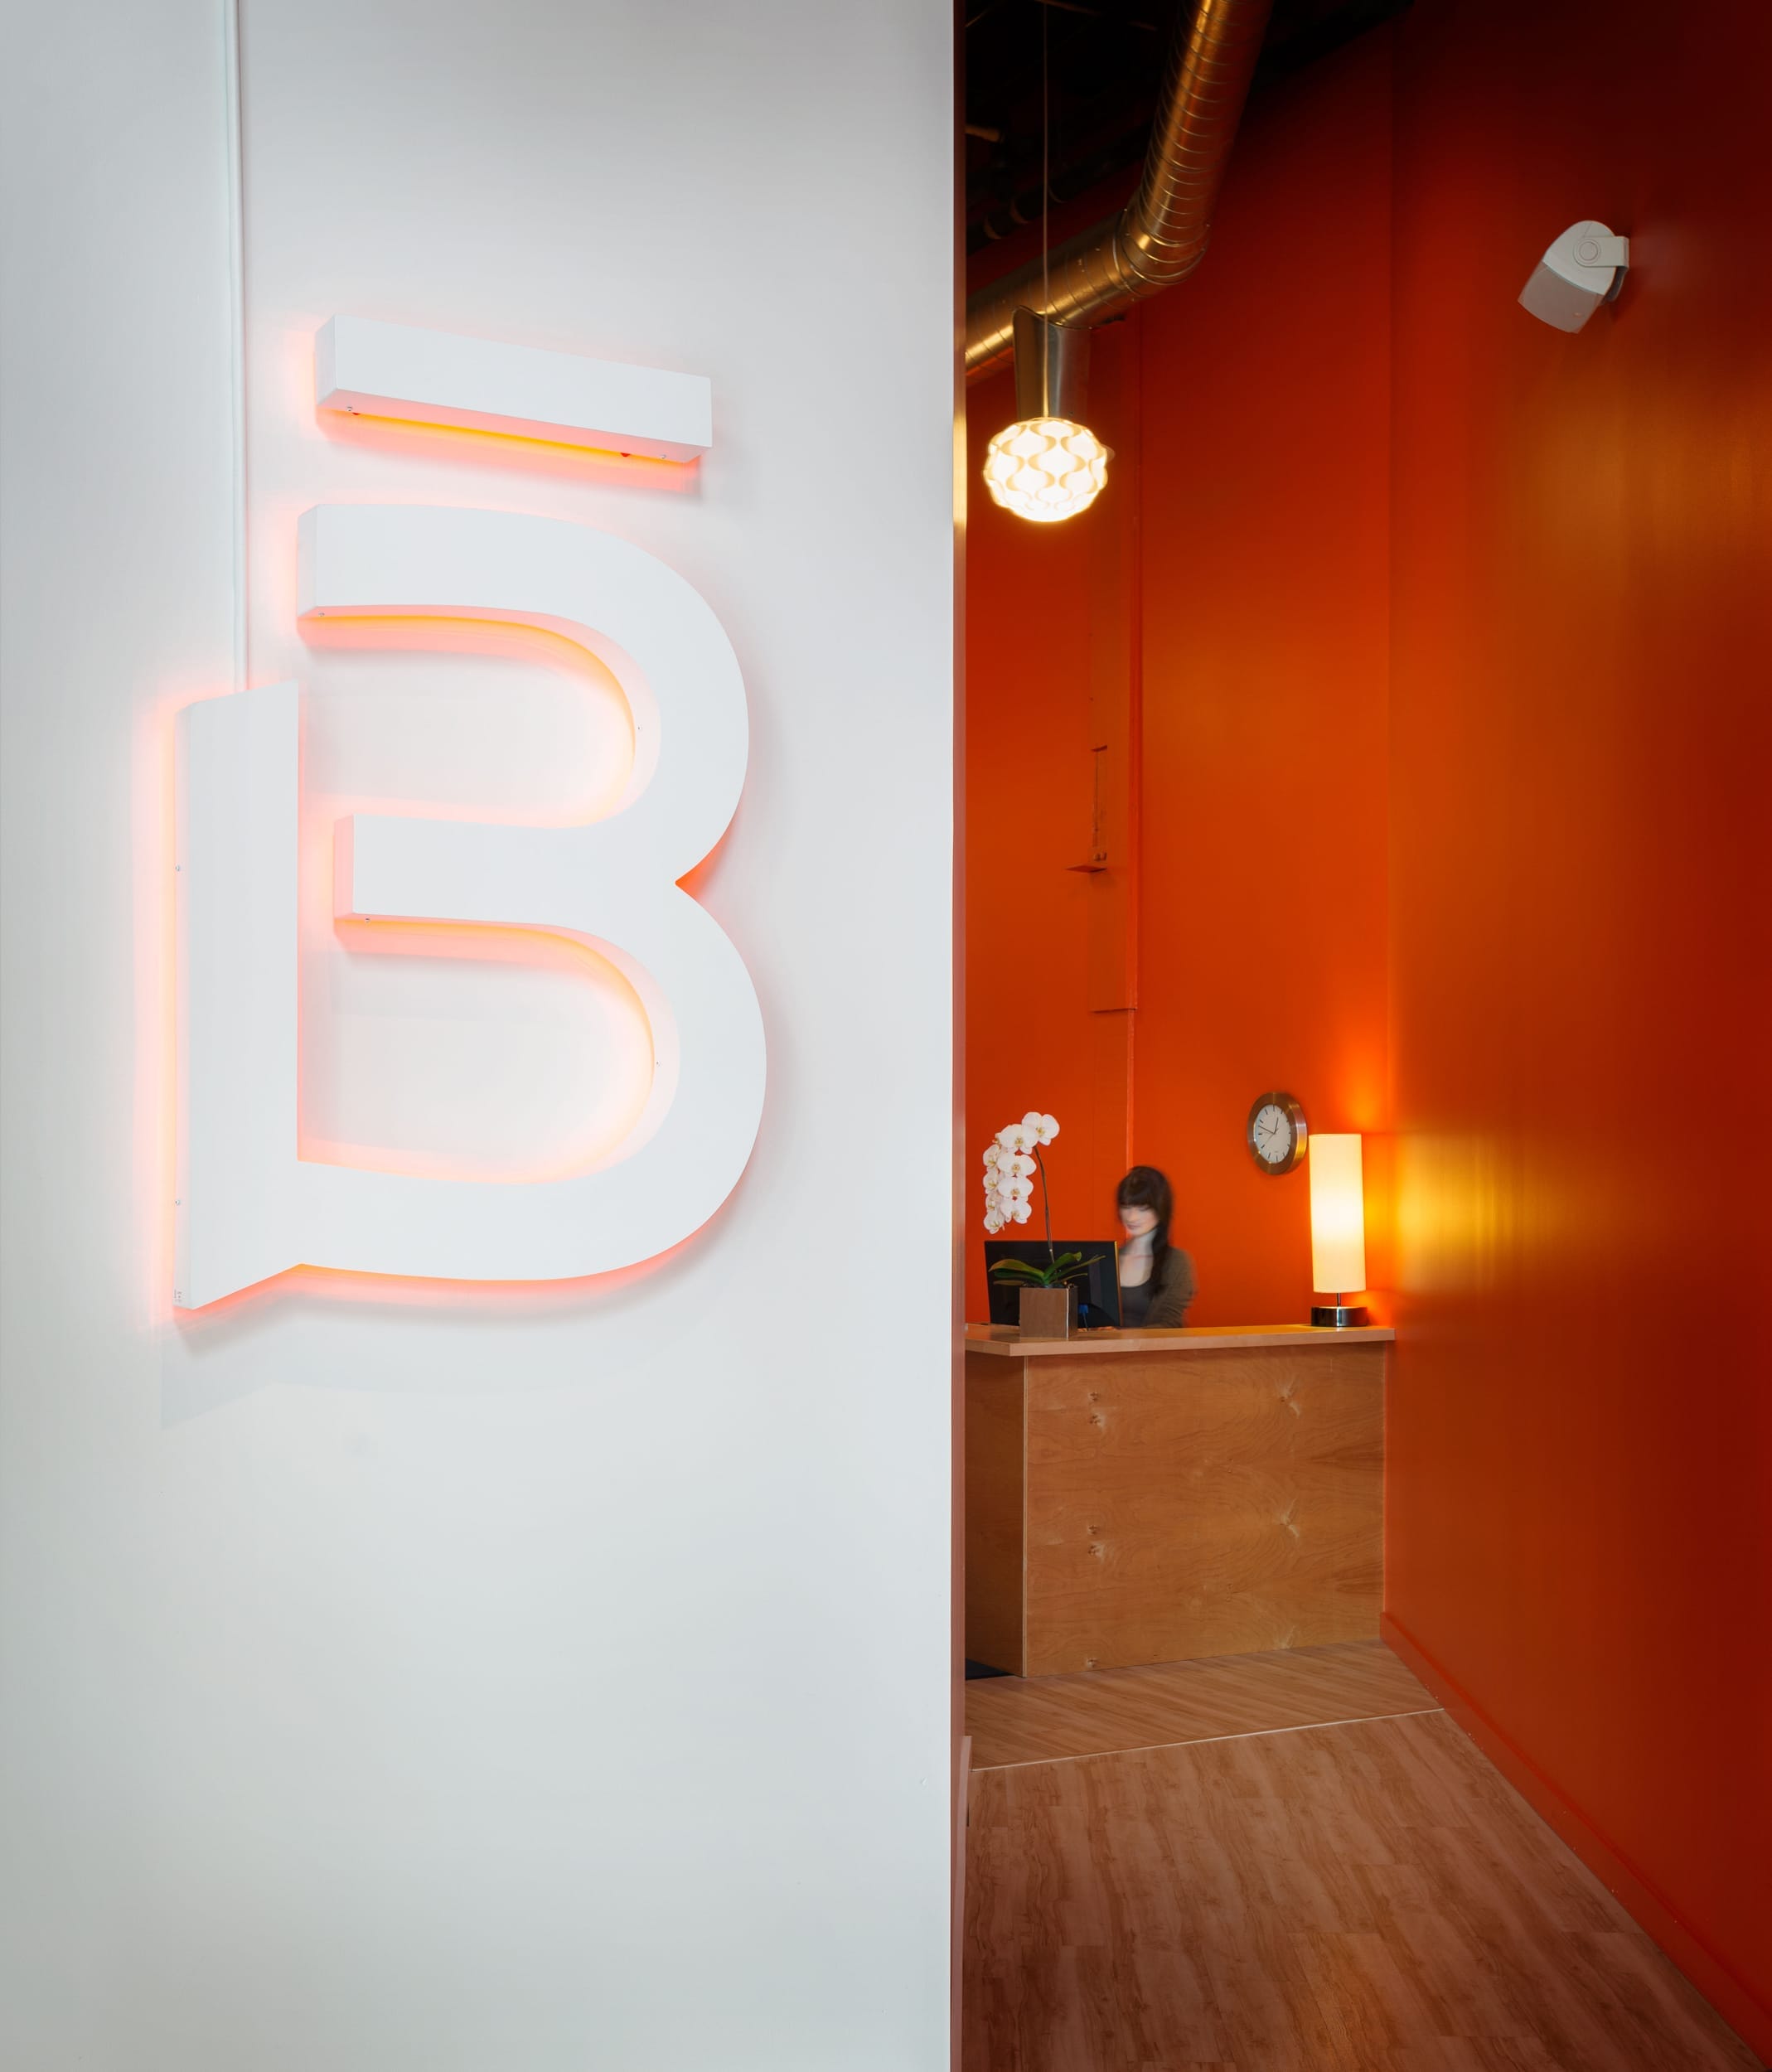 A bright orange office with the letter b on the wall.